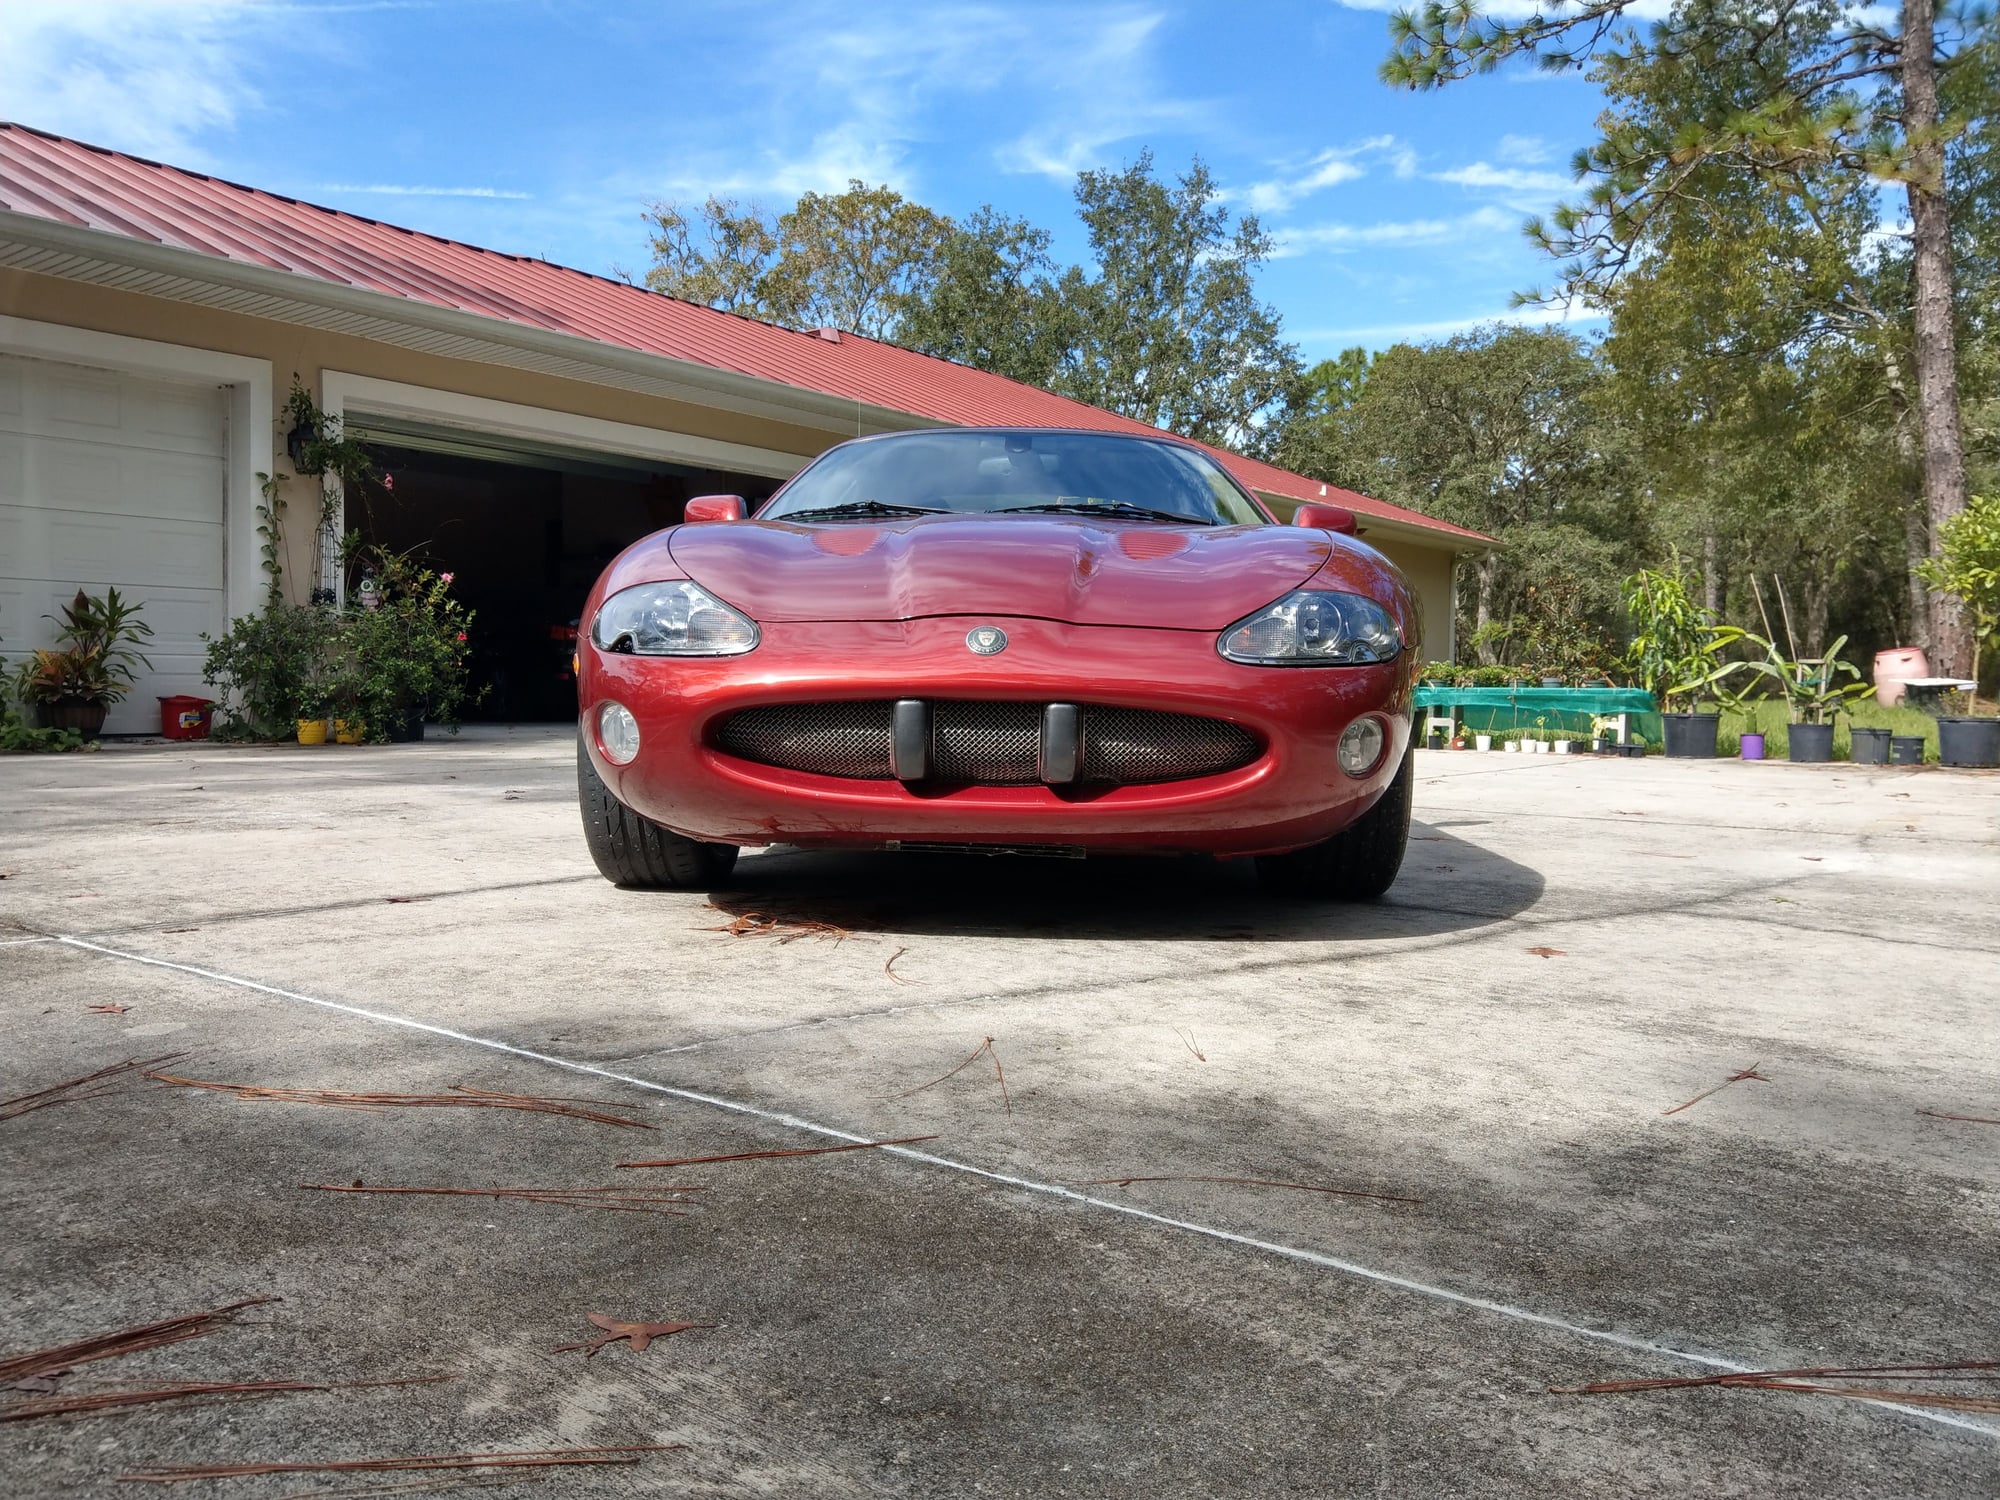 2004 Jaguar XKR - 2004 XKR Portfolio Edition - Used - VIN SAJDA42B443A38568 - 47,000 Miles - 8 cyl - 2WD - Automatic - Convertible - Red - Hudson, FL 34669, United States